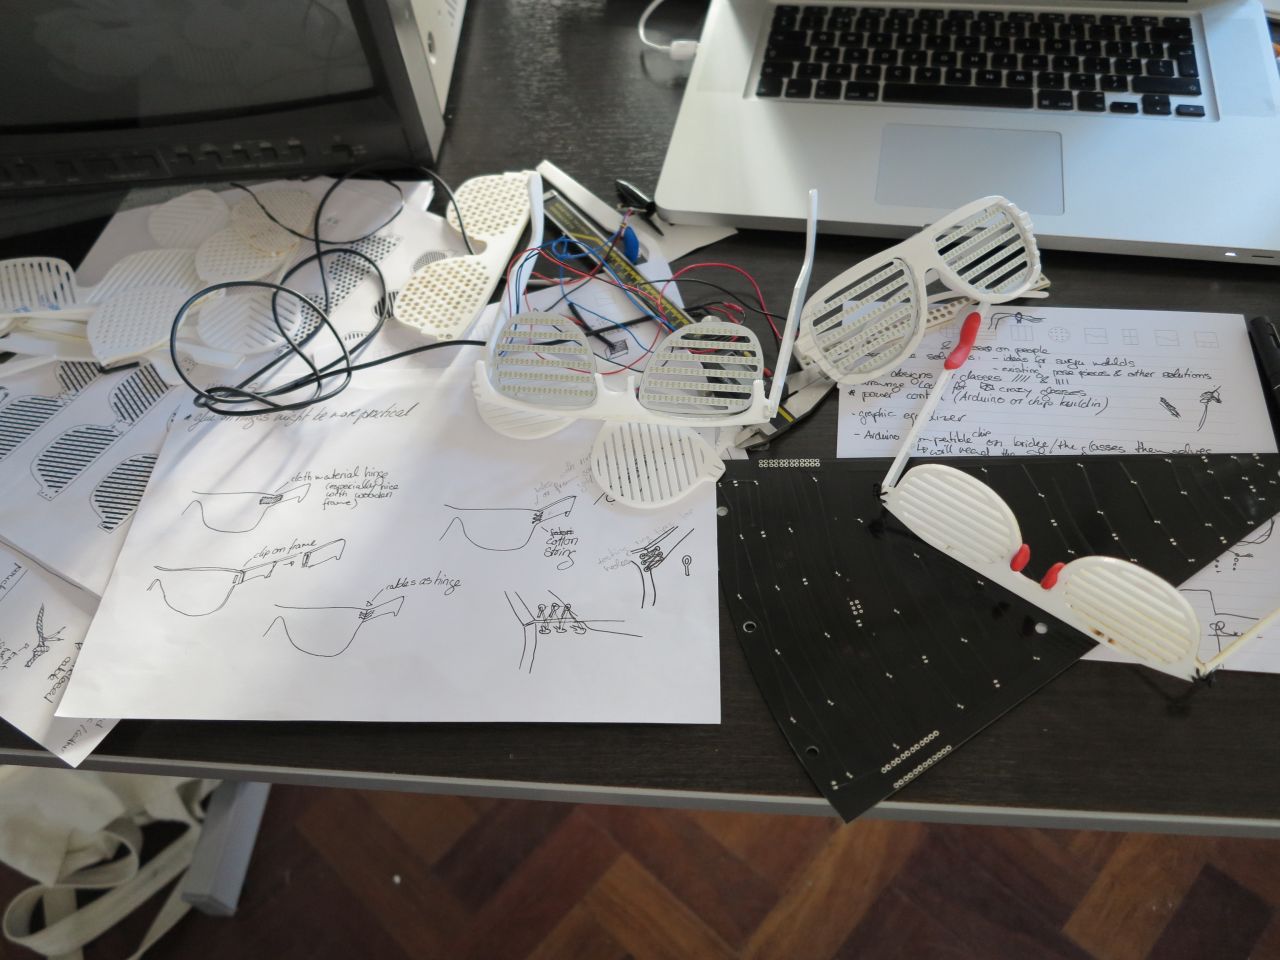 Technology Will Save Us (TWSU), the London-based group behind the product, sketched out an array of prototypes before listing the glasses on crowd-funding site Kickstarter, offering supporters an opportunity to bag an early bird edition of the sparkly specs. 